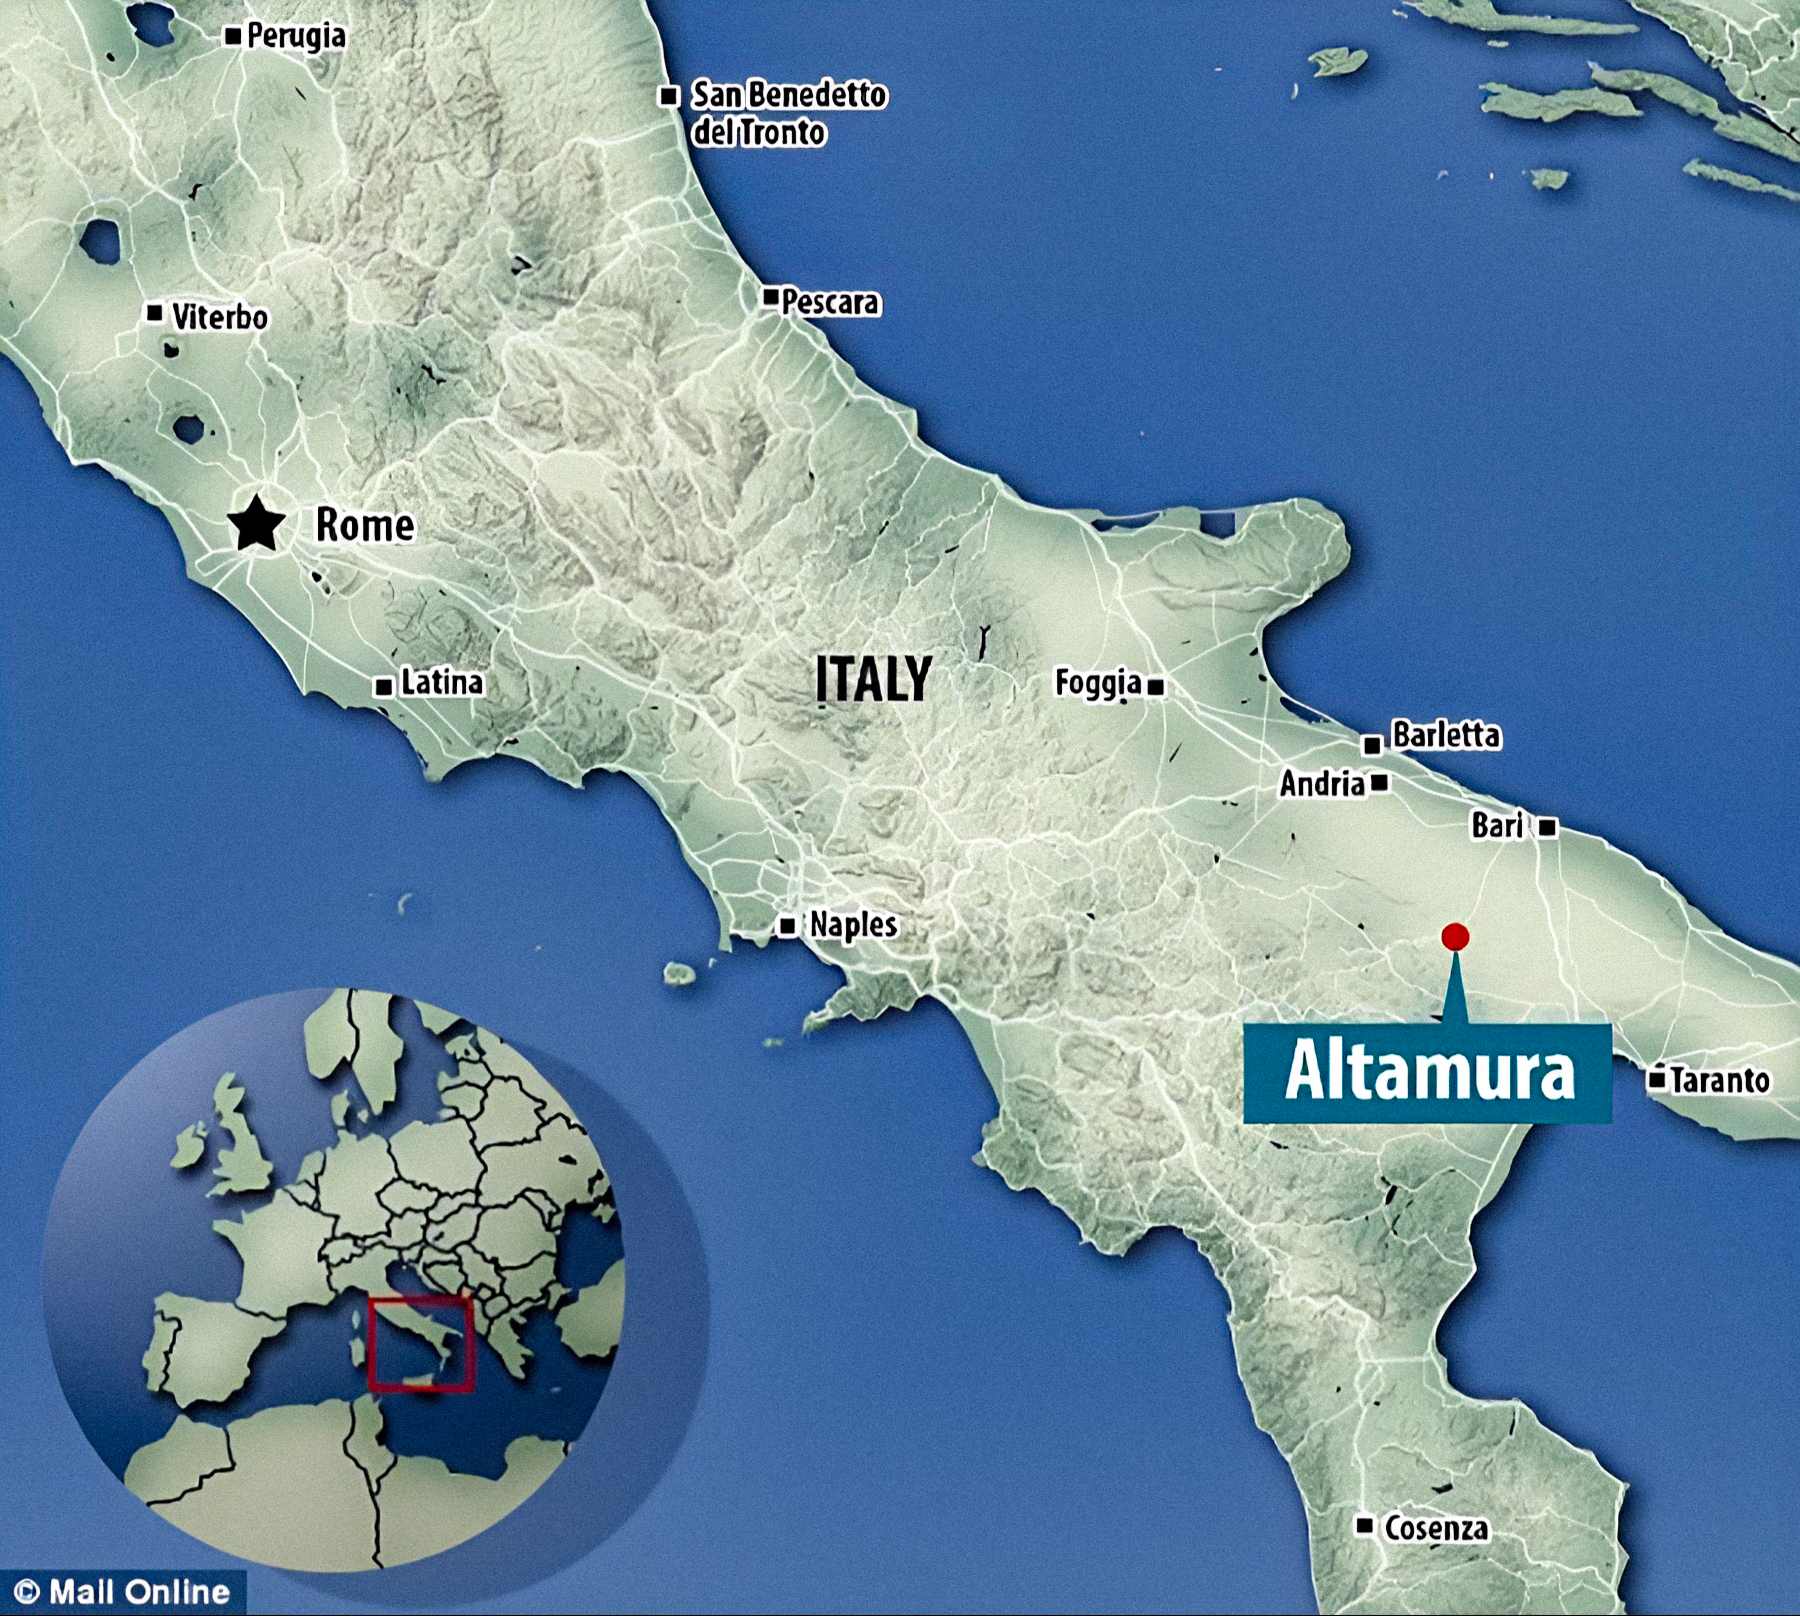 The location of the Lamalunga cave where the uniquely preserved Neanderthal skeleton was found is close to Altamura, Italy. Image Credit: DailyMail